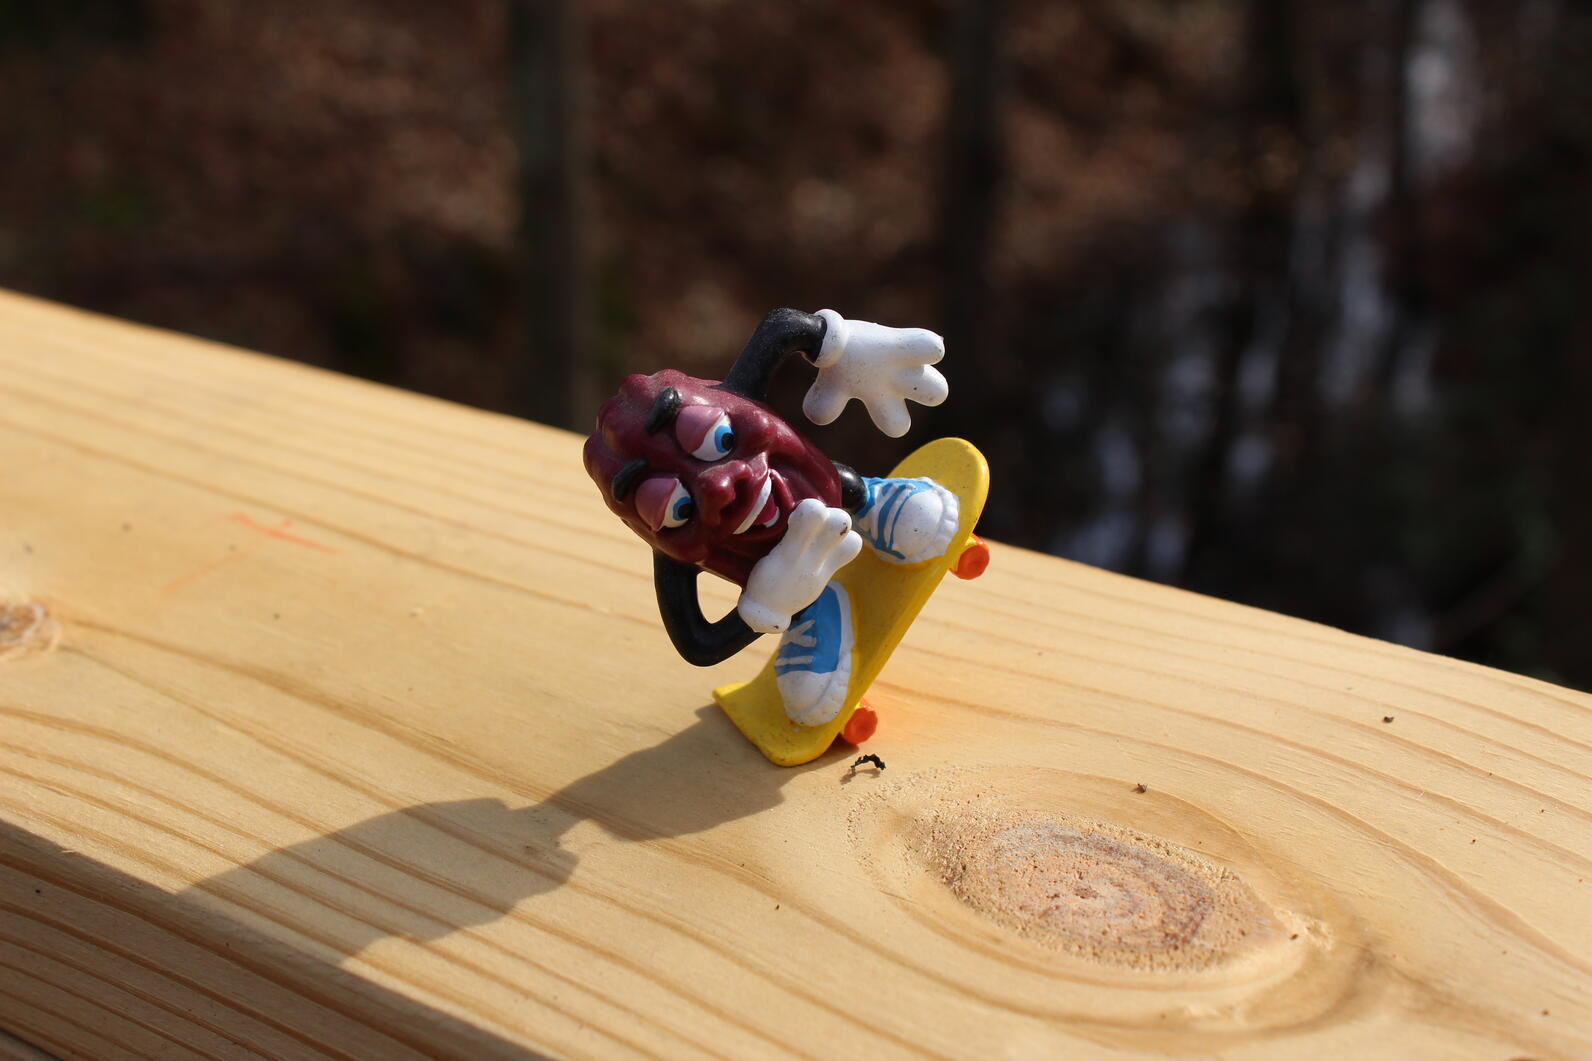 A toy of a California Raisin on a skateboard skates heedless of the sheer drop off on either side of the handrail, a clear sign of hubris disregarding risks in pursuit of adrenaline.